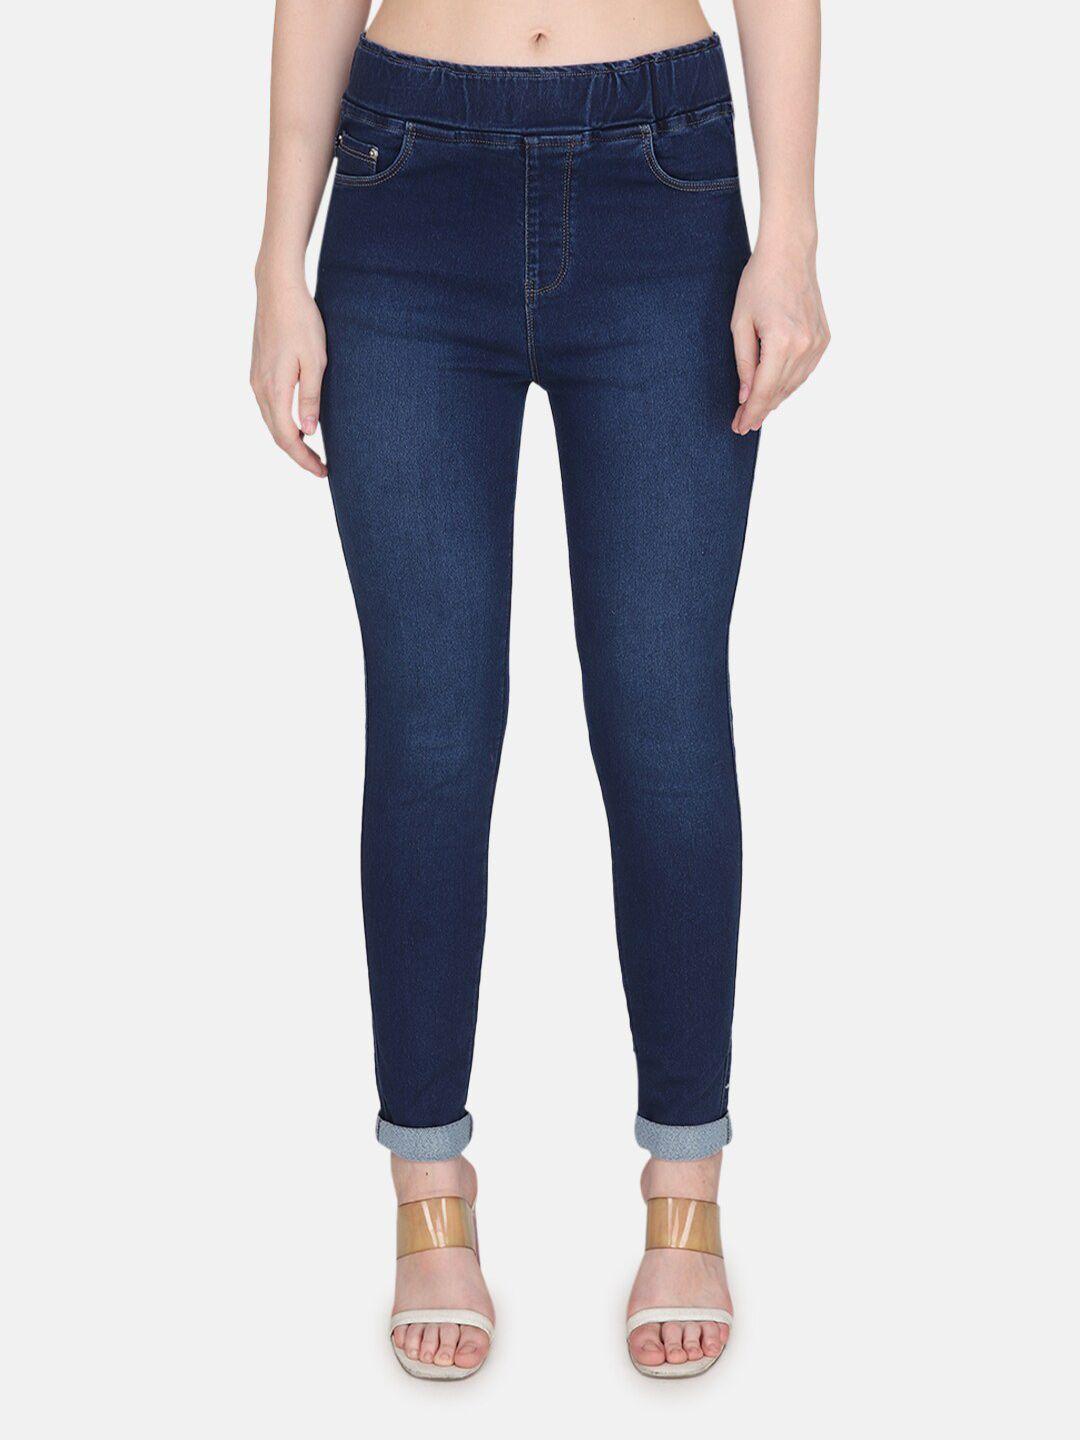 albion-women-mid-rise-relaxed-fit-denim-cotton--jeggings